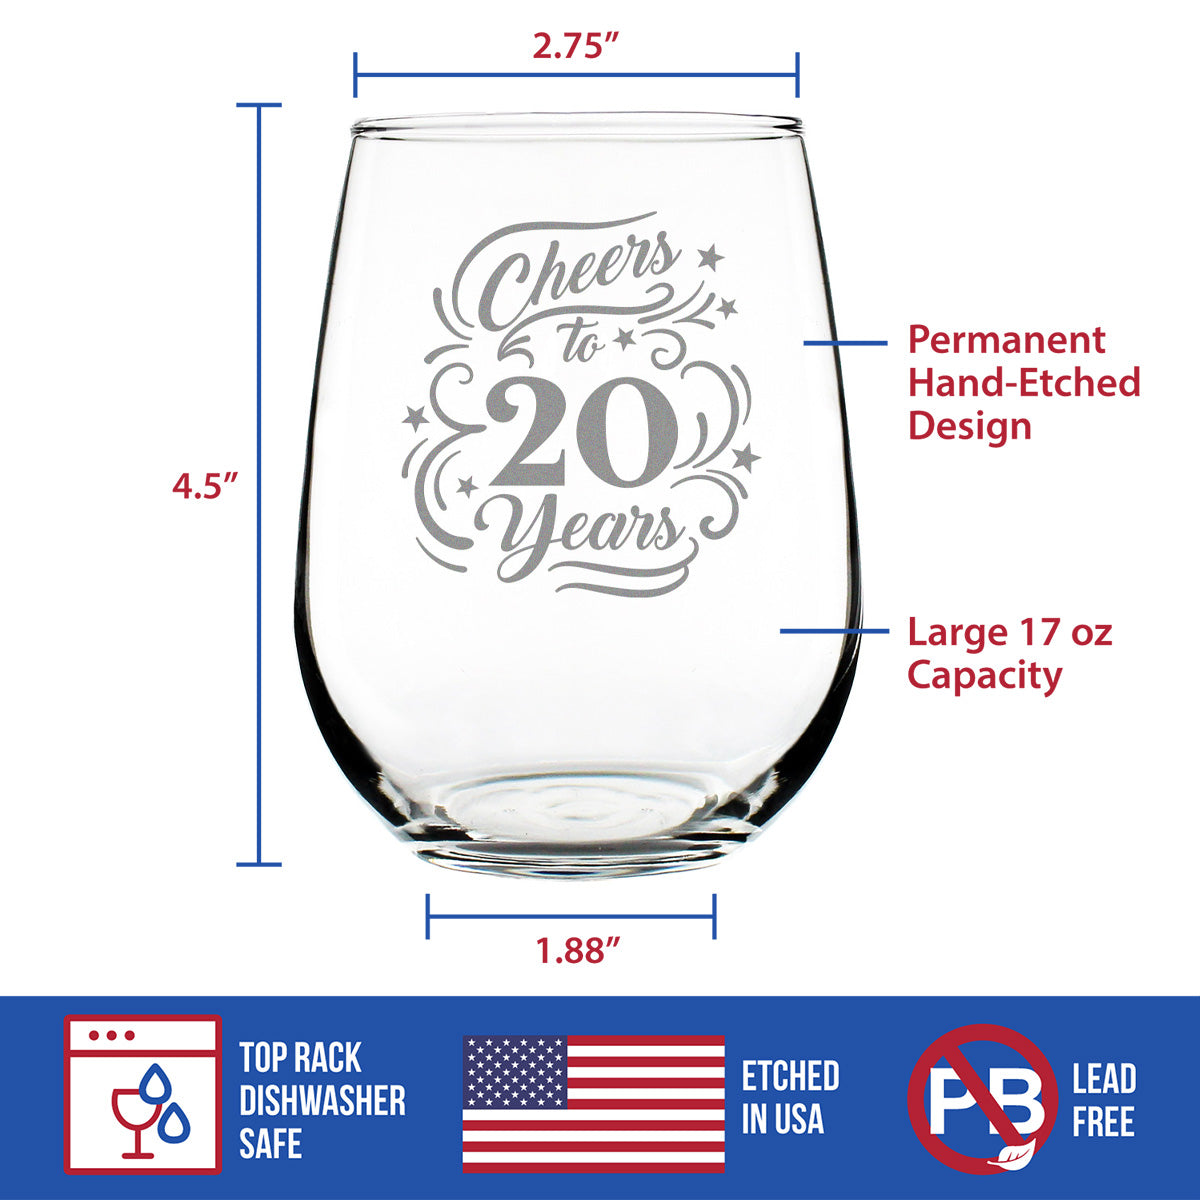 Cheers to 20 Years - Stemless Wine Glass Gifts for Women &amp; Men - 20th Anniversary or Birthday Party Decor - Large Glasses